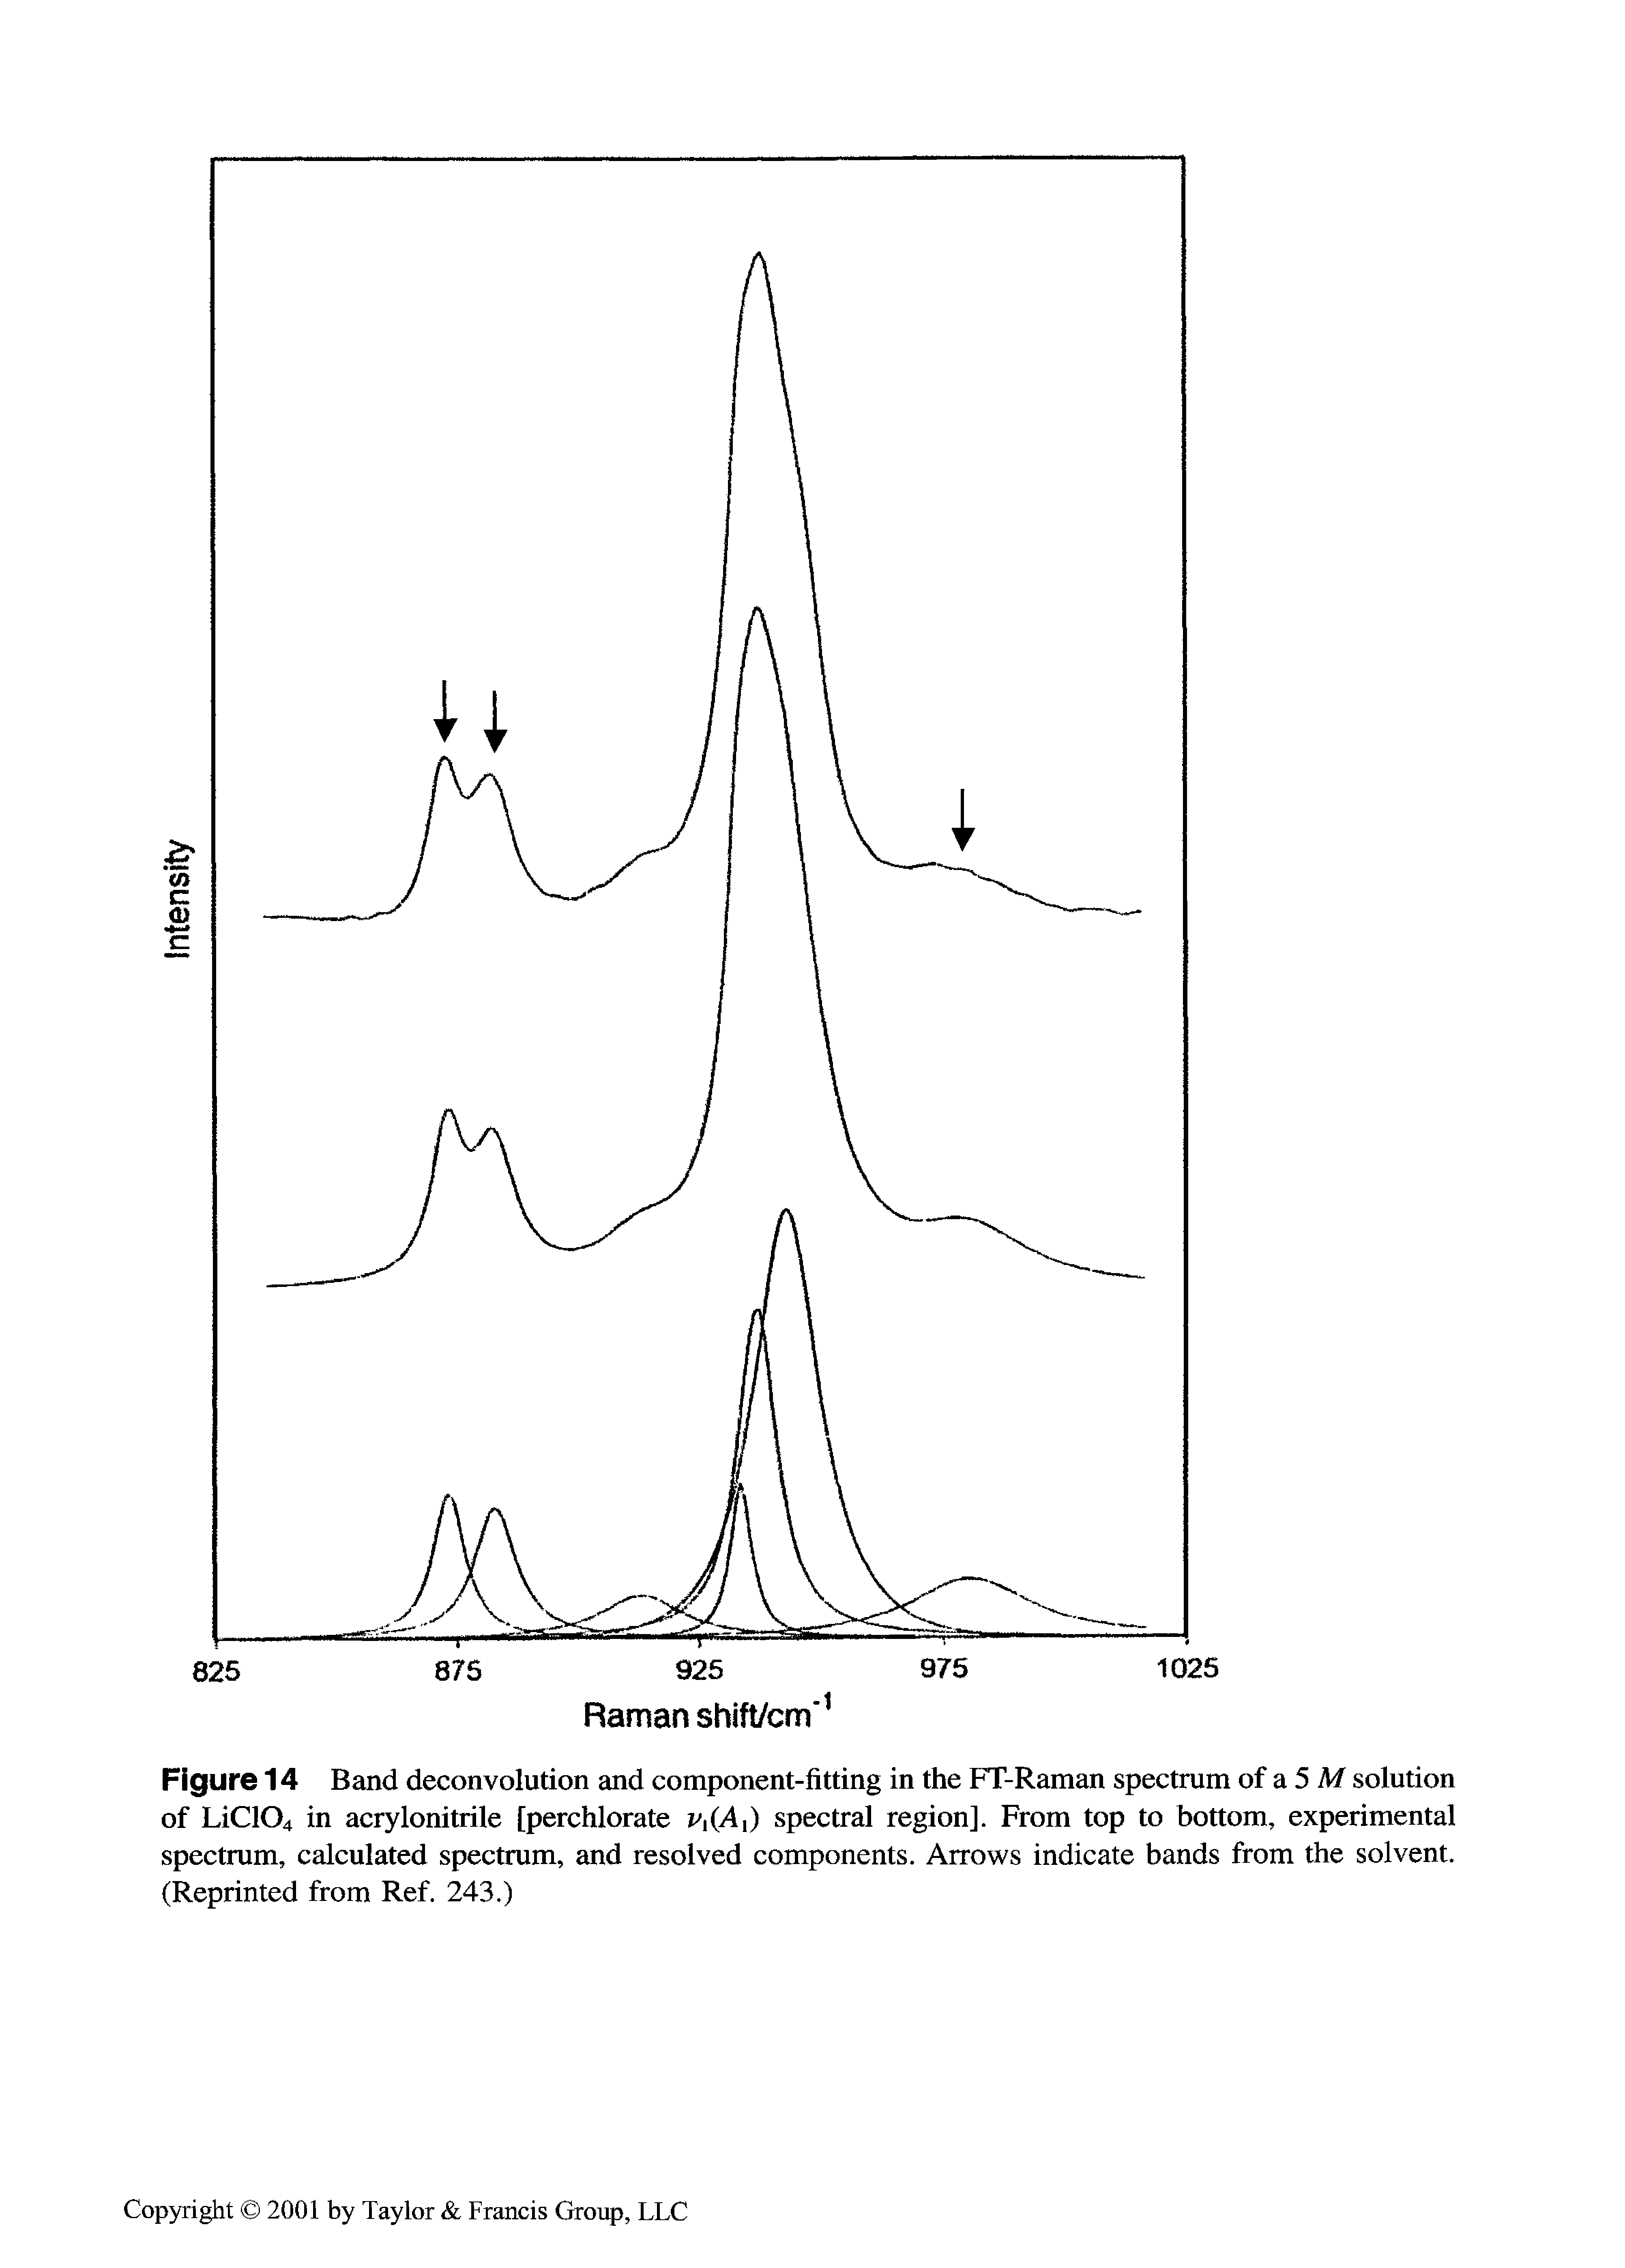 Figure 14 Band deconvolution and component-fitting in the FT-Raman spectrum of a 5 M solution of LiC104 in acrylonitrile [perchlorate Pt(Ai) spectral region]. From top to bottom, experimental spectrum, calculated spectrum, and resolved components. Arrows indicate bands from the solvent. (Reprinted from Ref. 243.)...